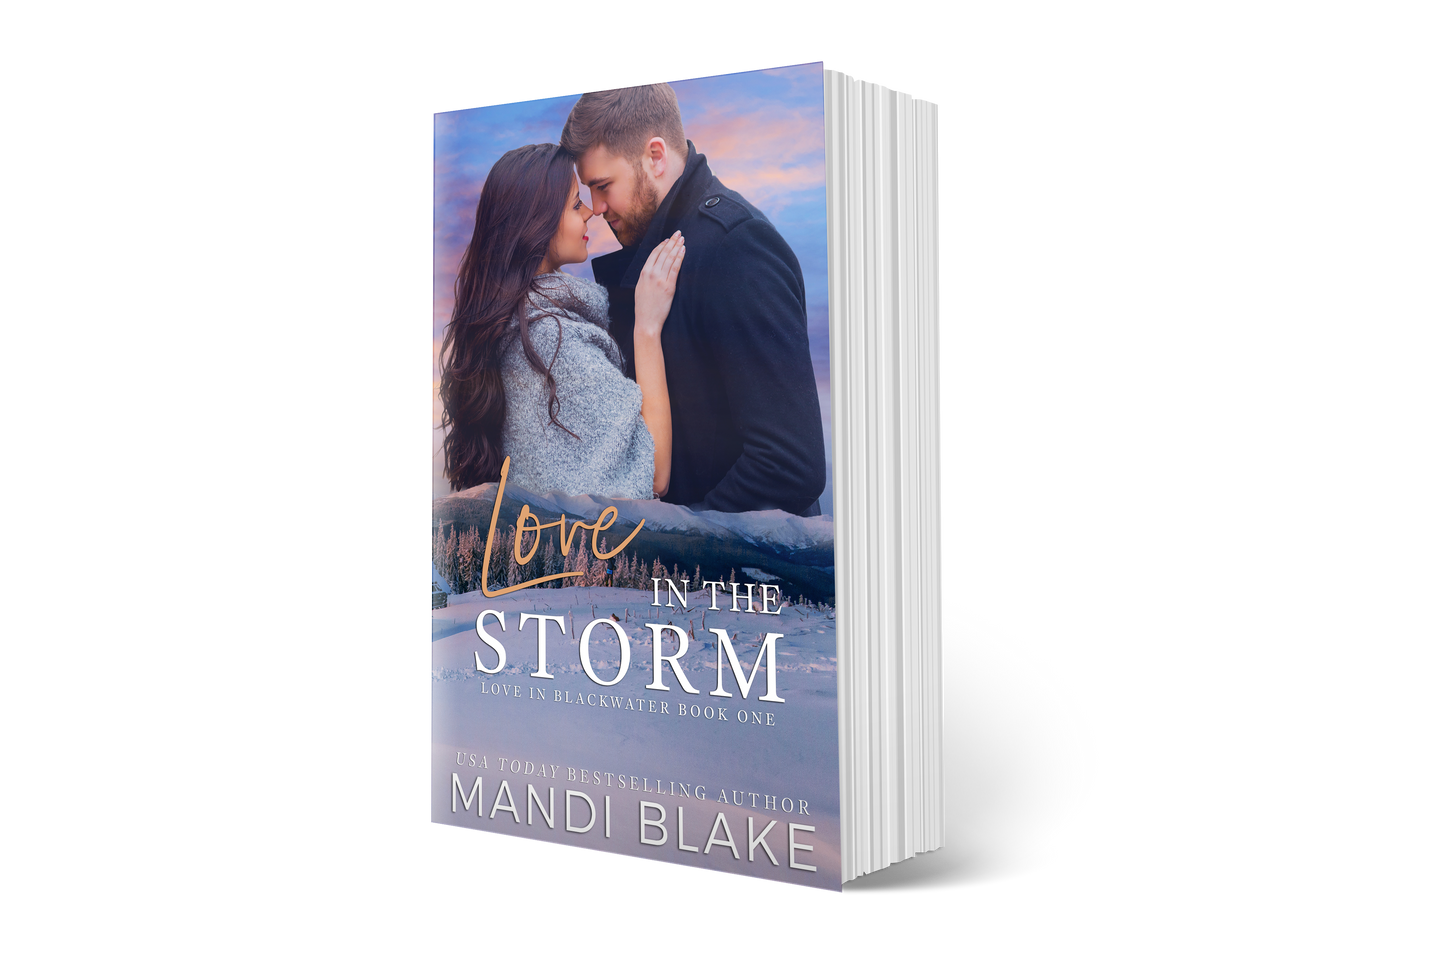 Love in the Storm - Signed Paperback